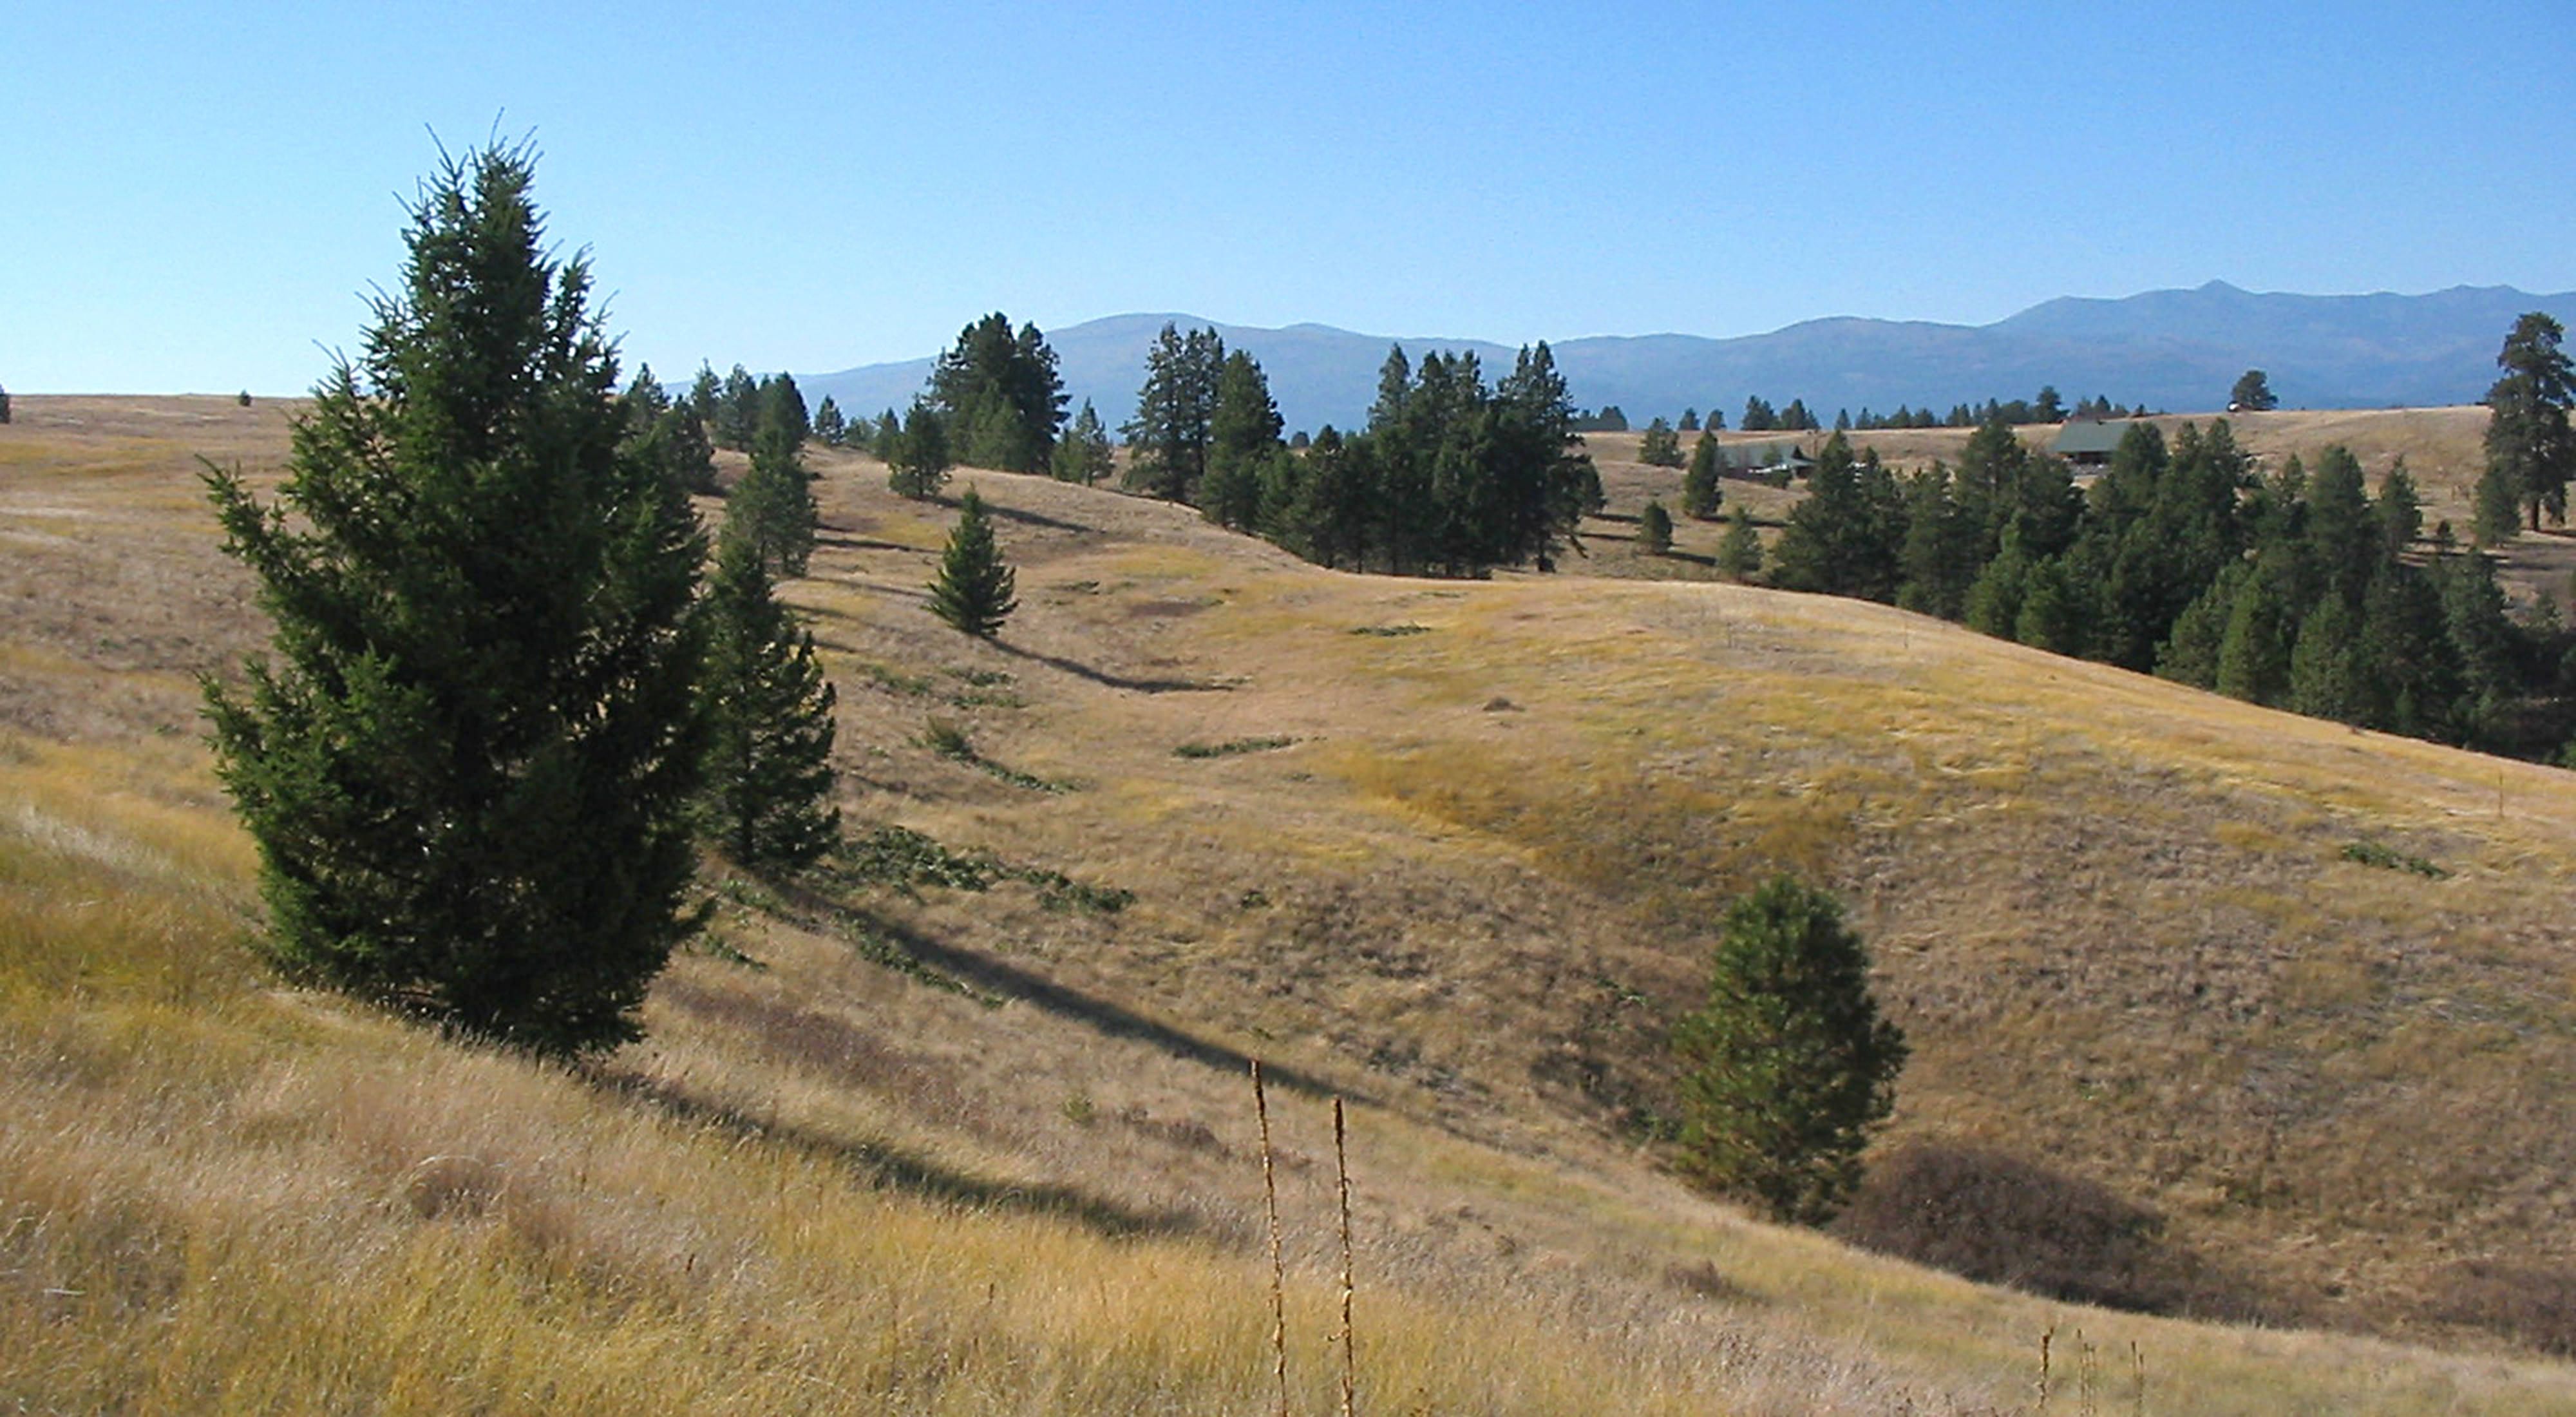 A hillside with brown grass and some scattered trees.